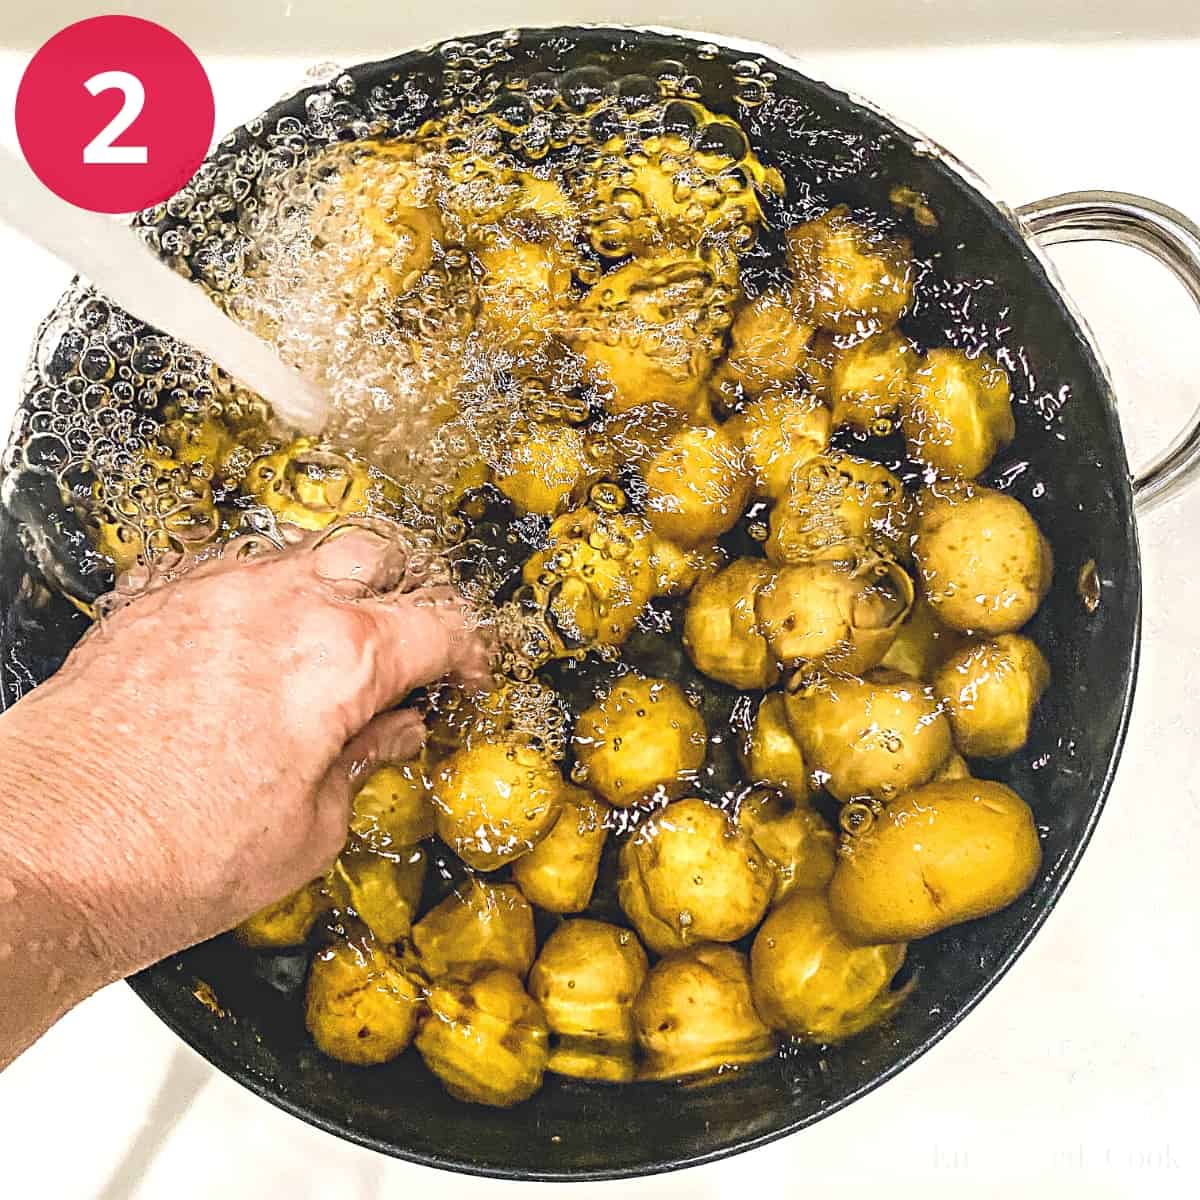 Process Photo 2 - Covering the potatoes with cold water.